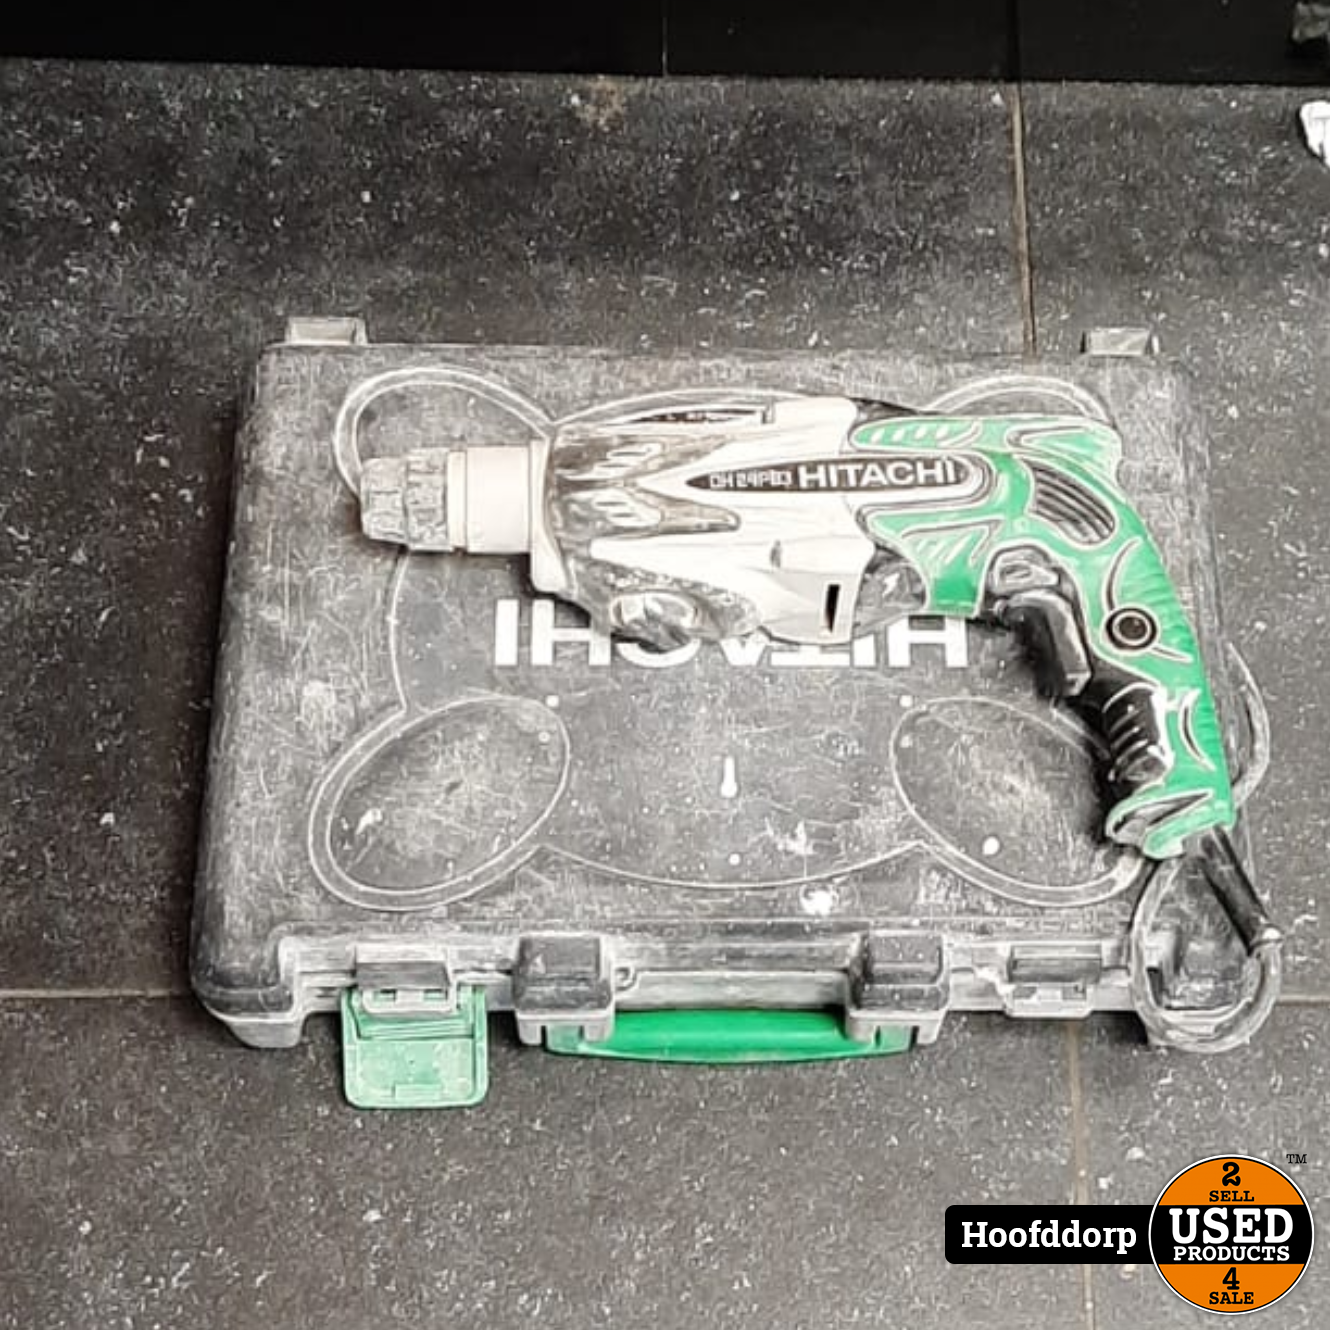 Hitachi - Used Products Hoofddorp